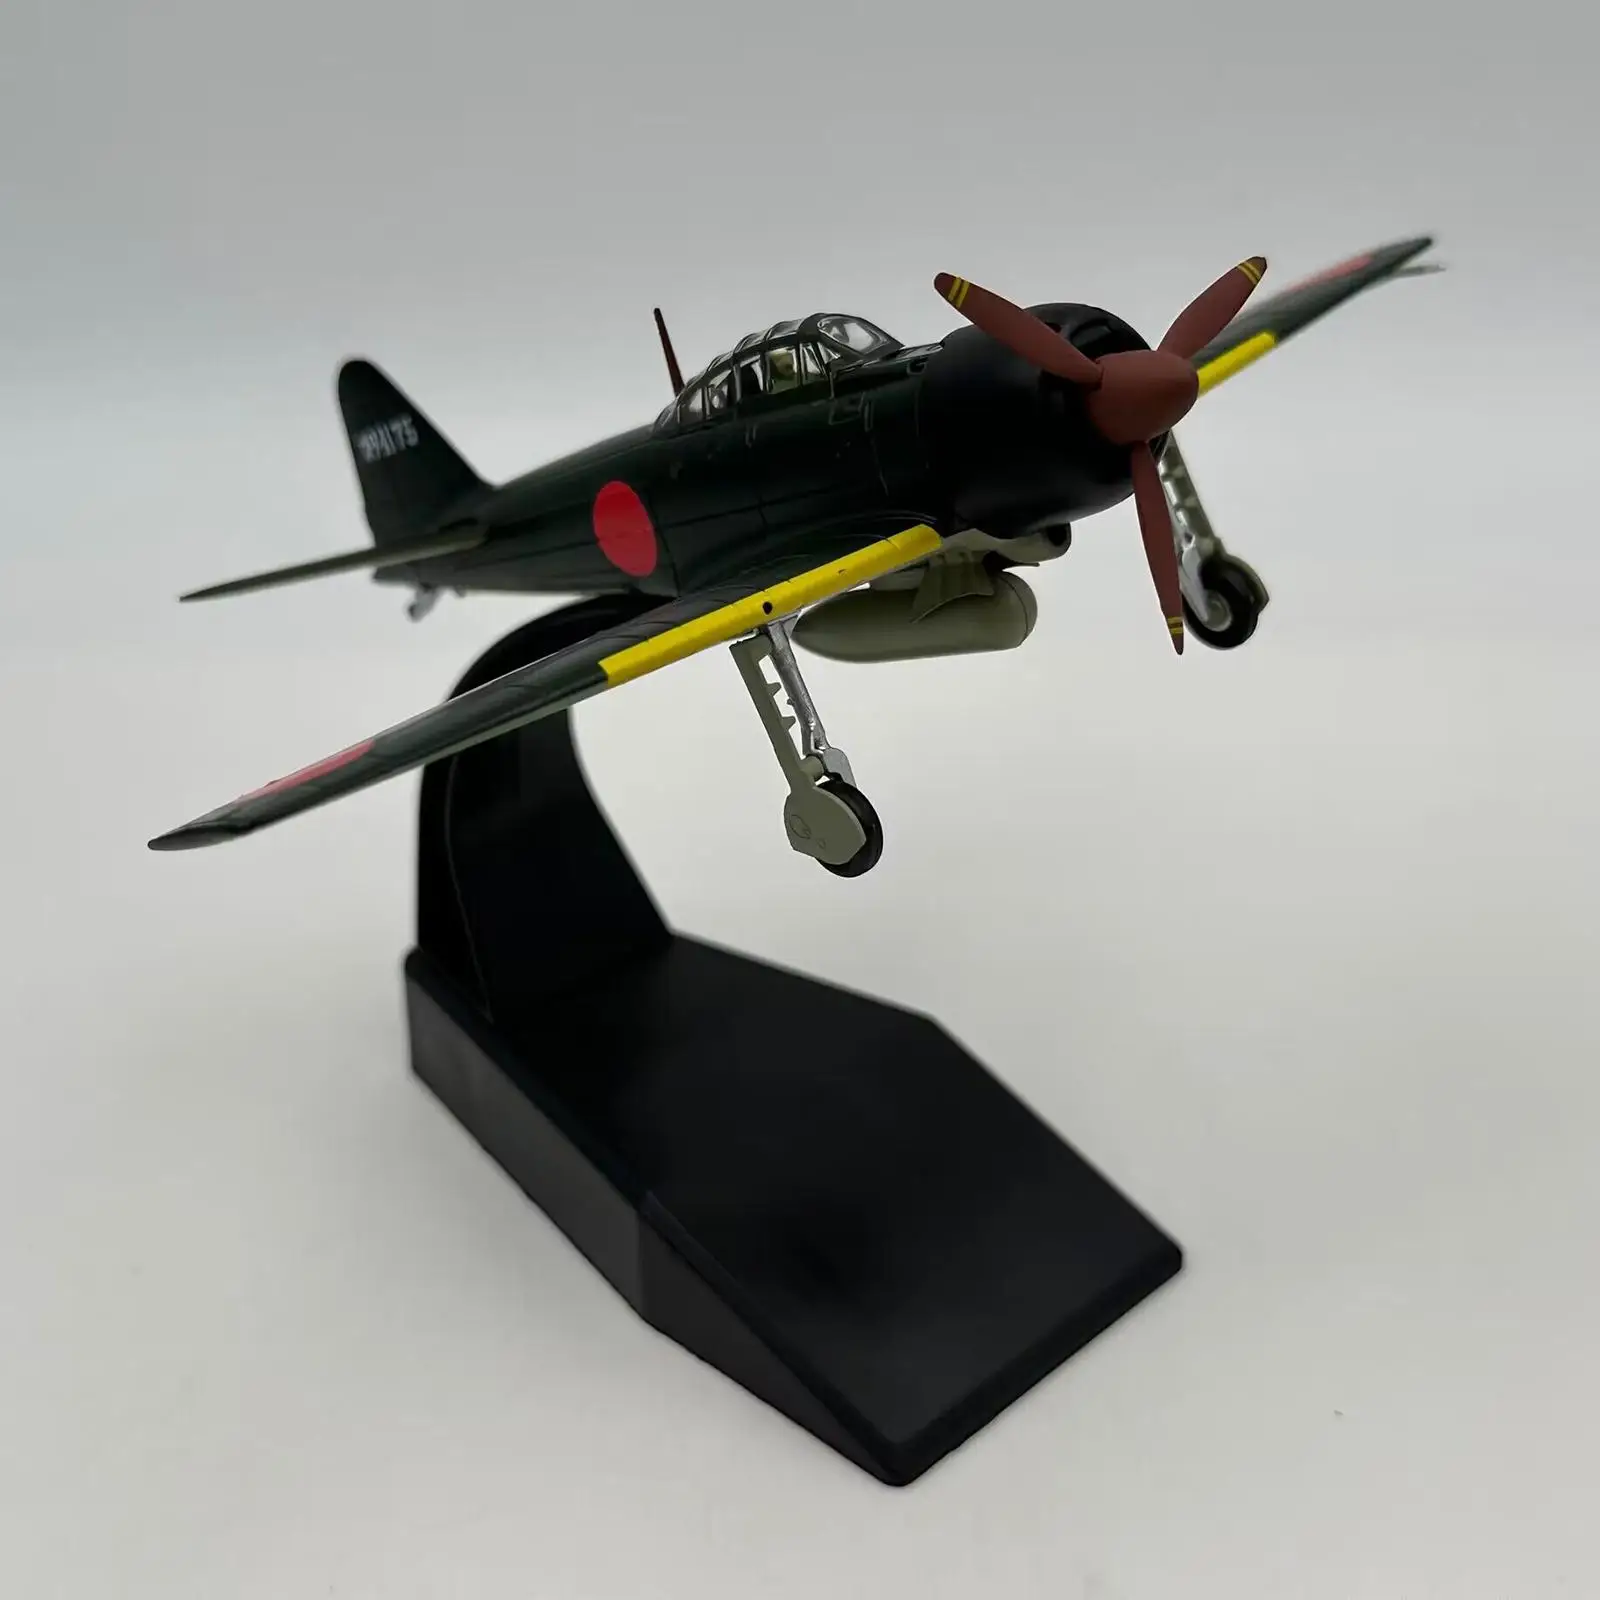 1/72 Simulation Diecast Planes Collection Display Ornaments Fighter Model for Desktop Bar Bedroom Table Birthday Gifts